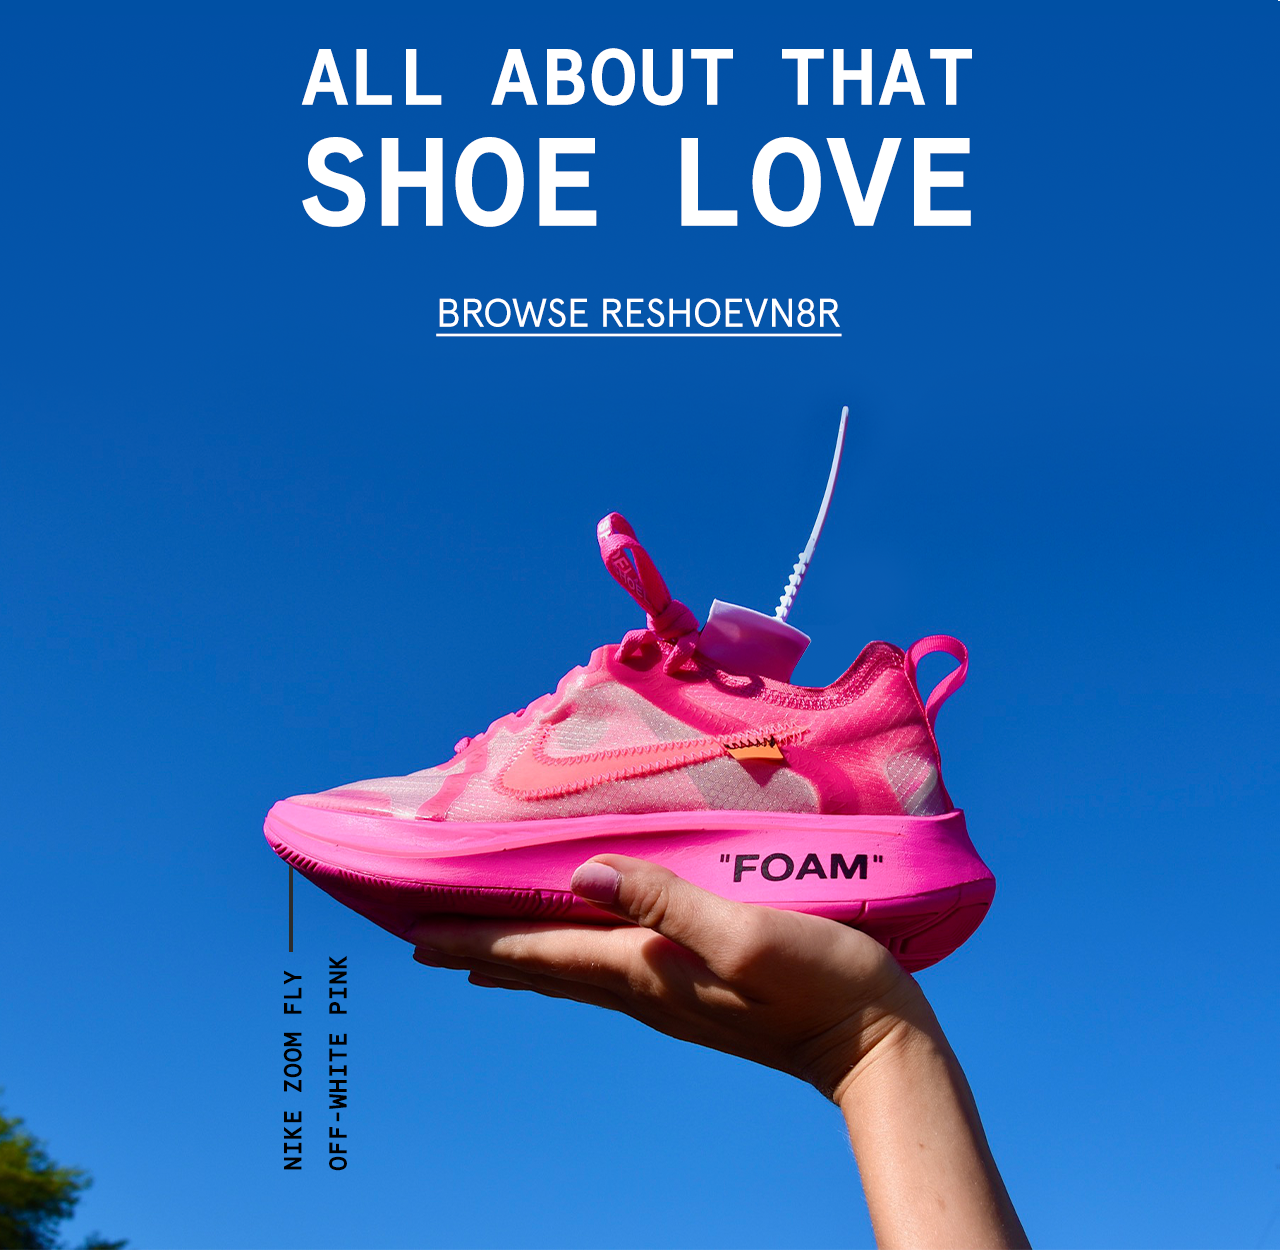 All About That Shoe Love [BROWSE RESHOEVN8R]